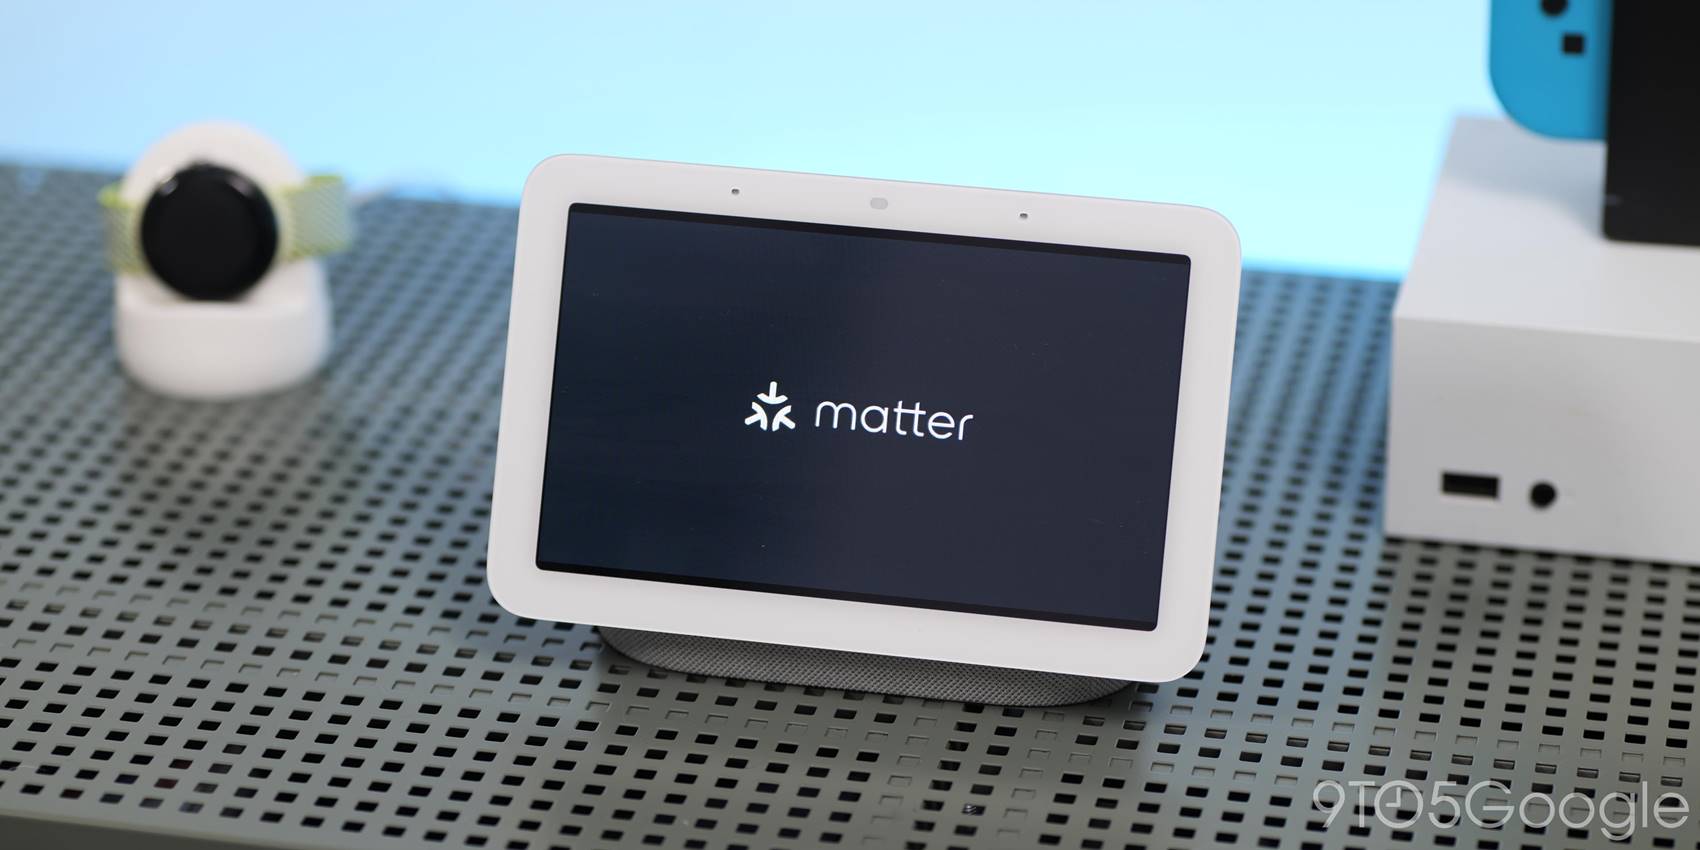 Matter is now available on Google Nest and Android devices